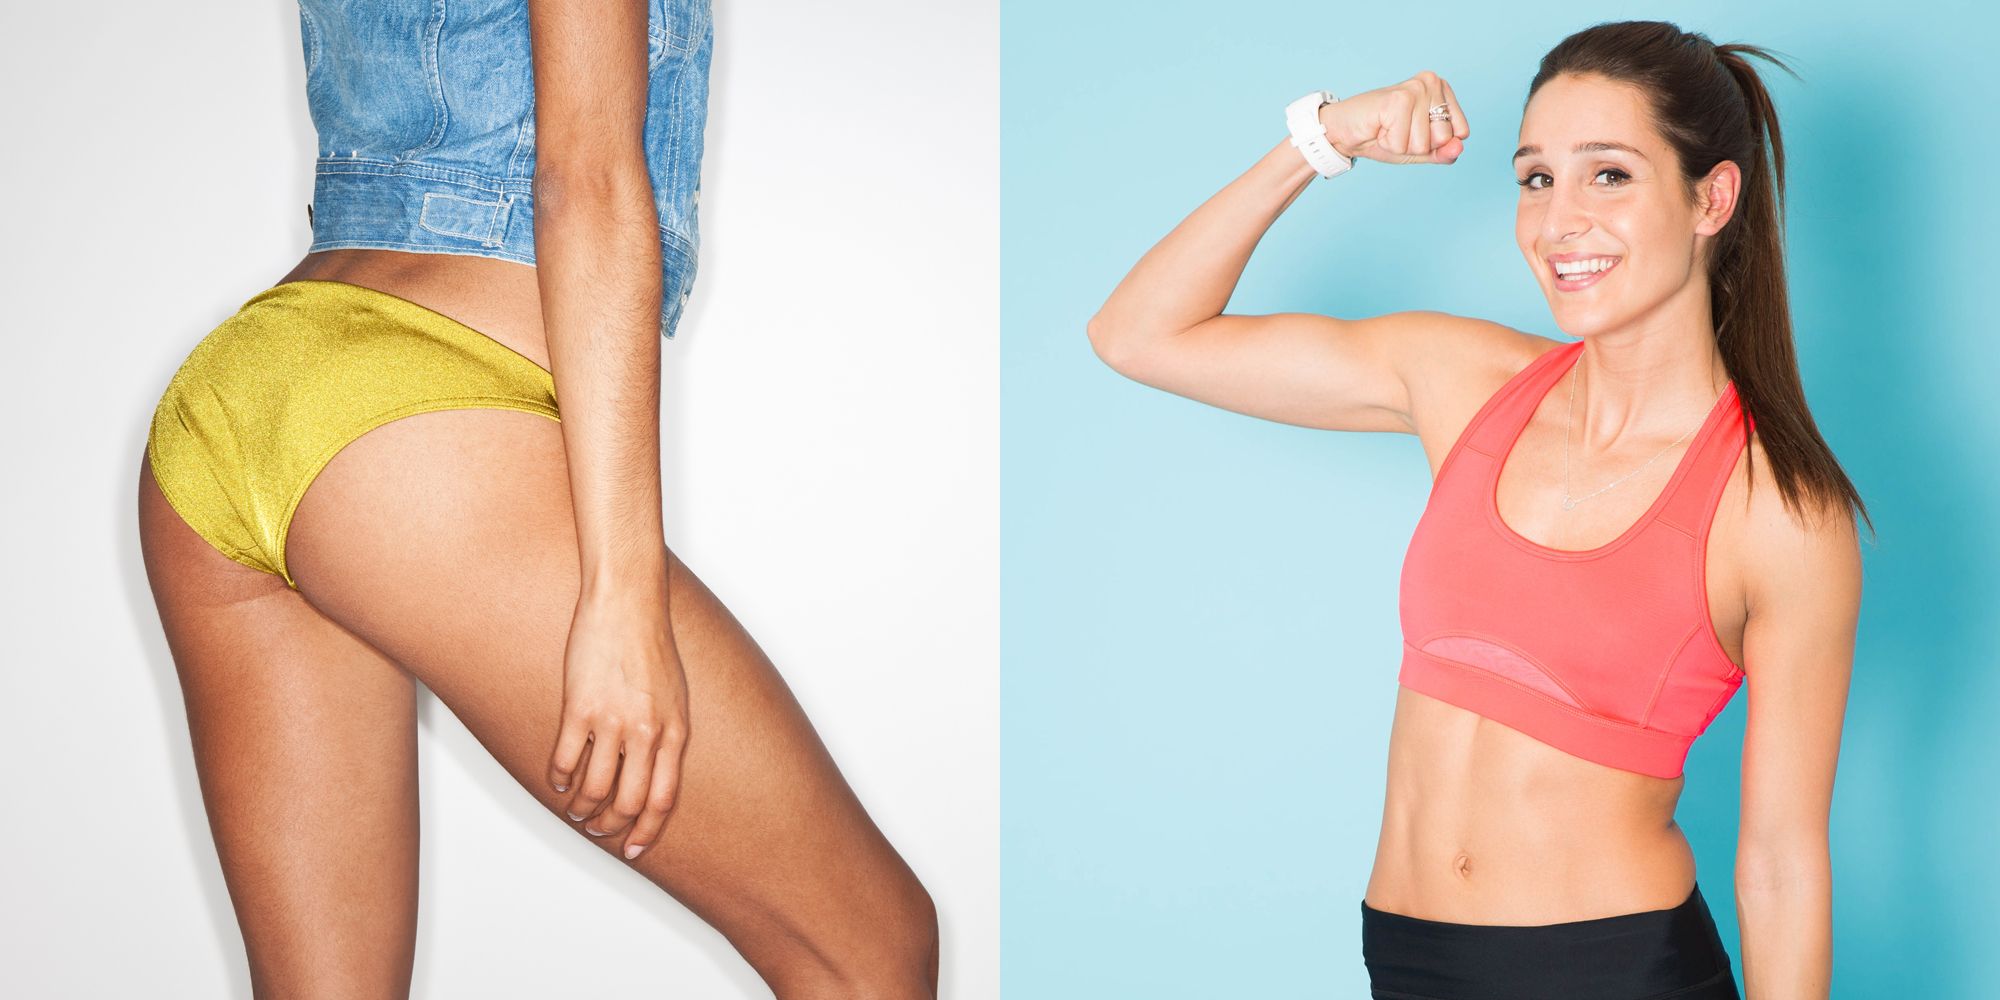 BBG Butt Workout from Kayla Itsines: 8 Moves That Would Be in the